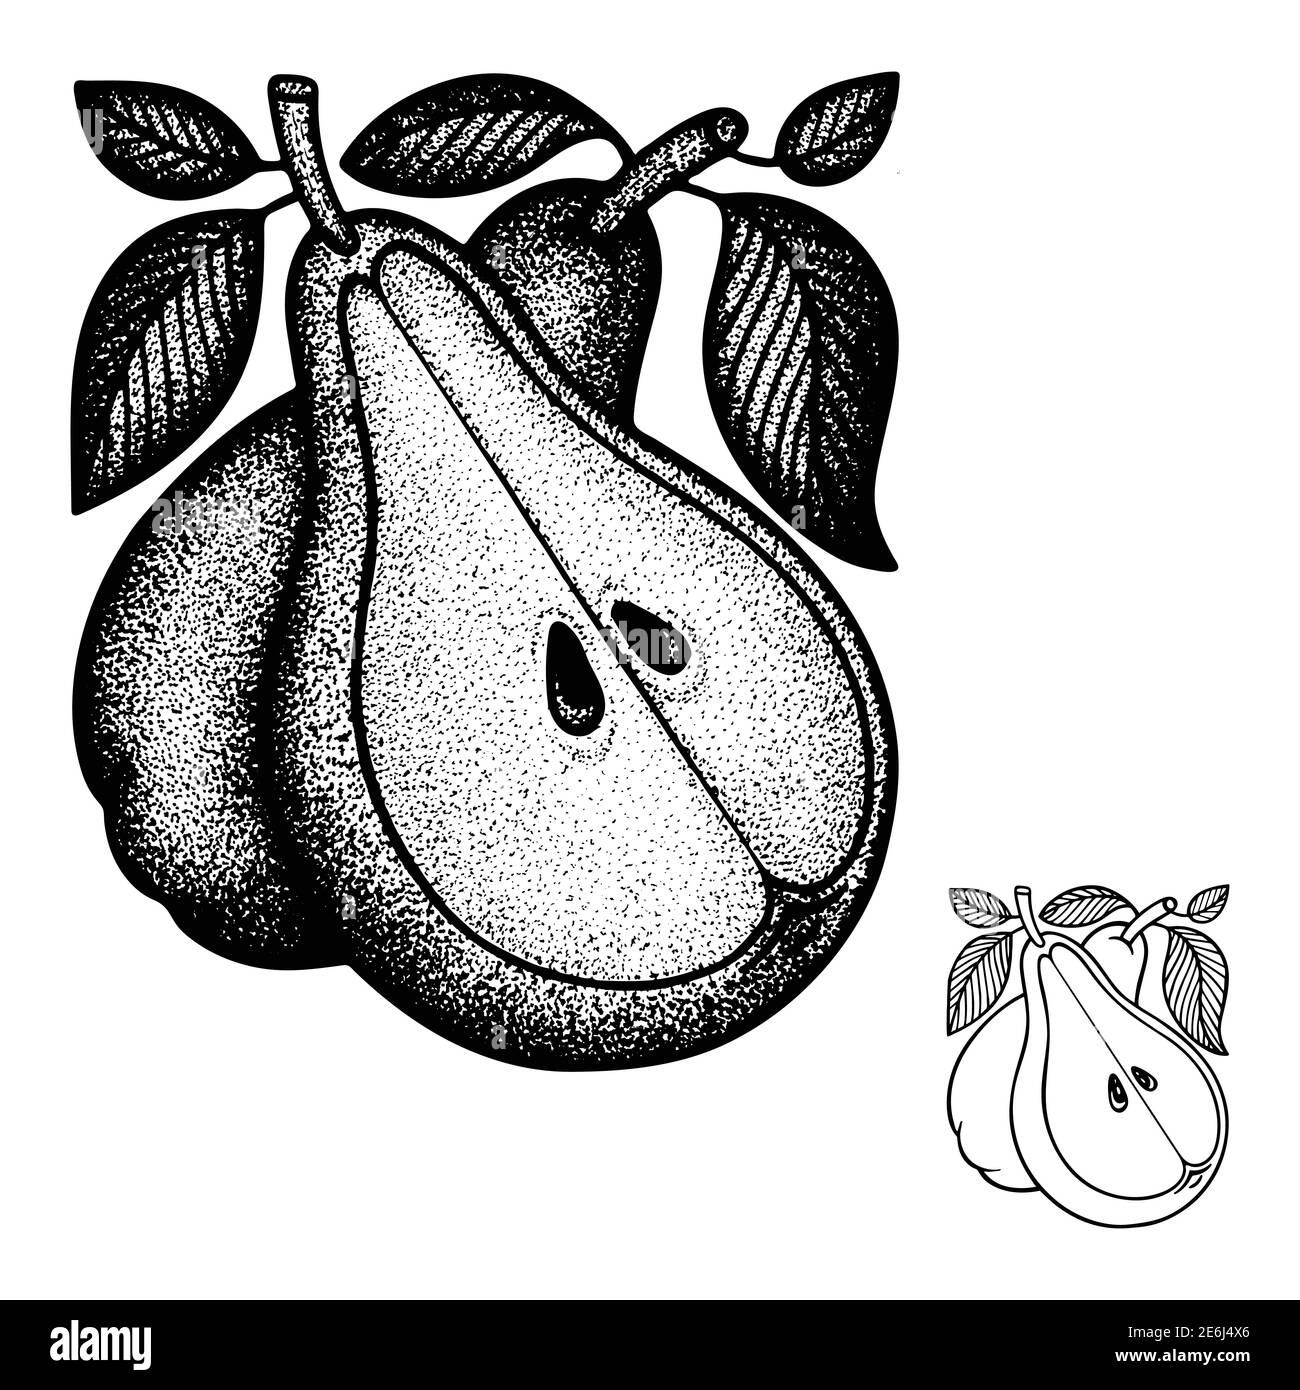 Pears hand drawn vintage style vector illustration. Engraving, retro style drawing pears with leaves. Dotted pears graphic. Part of set. Stock Vector